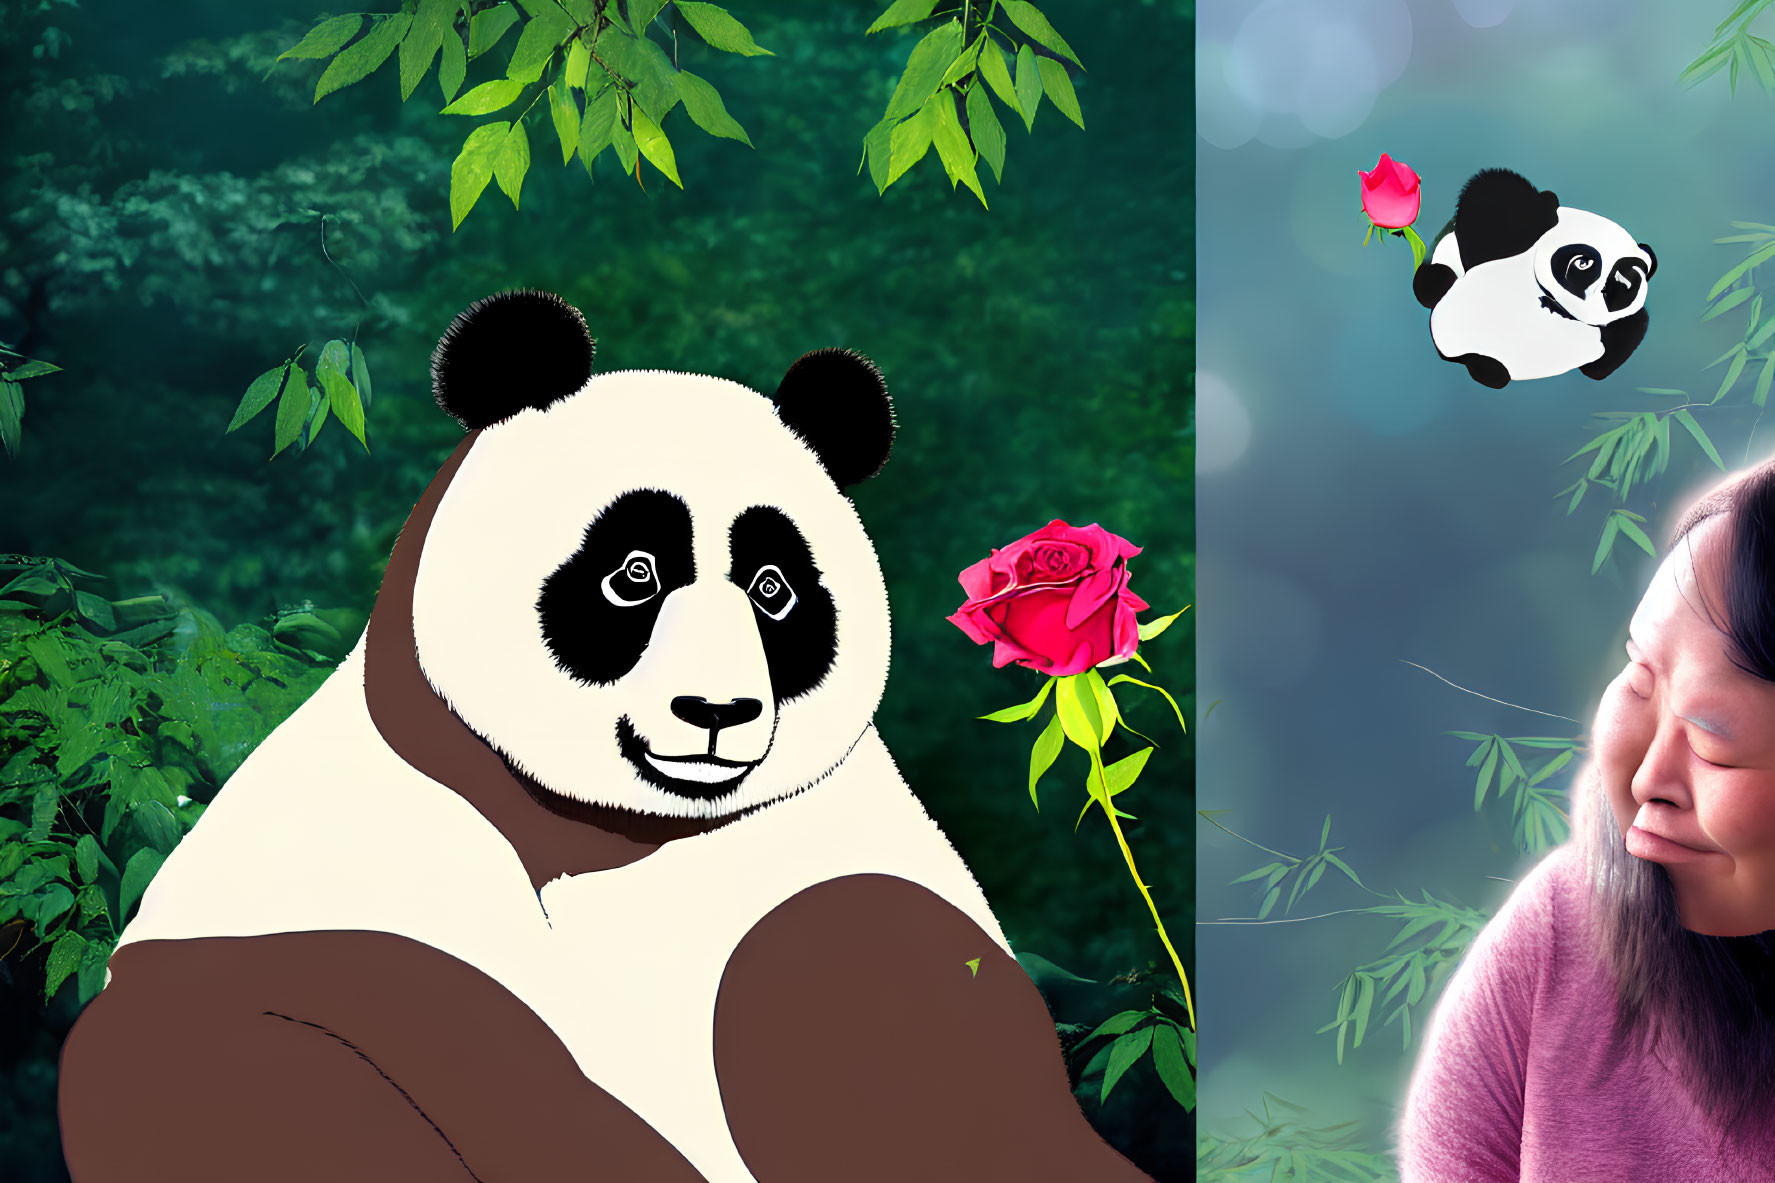 Surreal collage of giant panda, rose, cub, and smiling woman